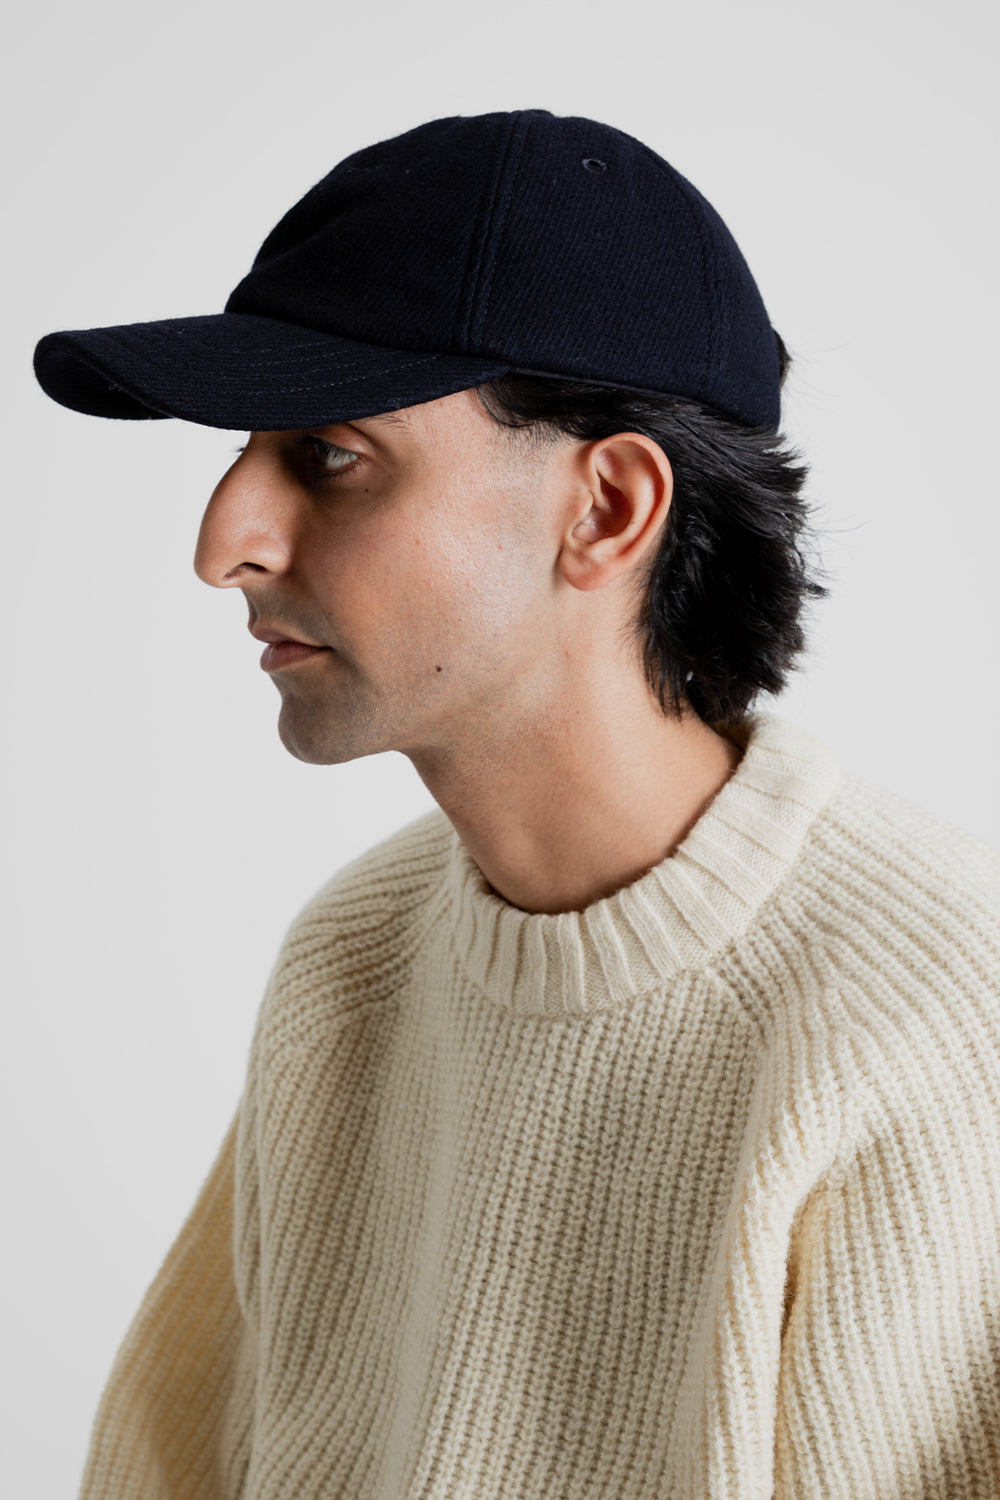 Parages Archie Wool Cap in Navy